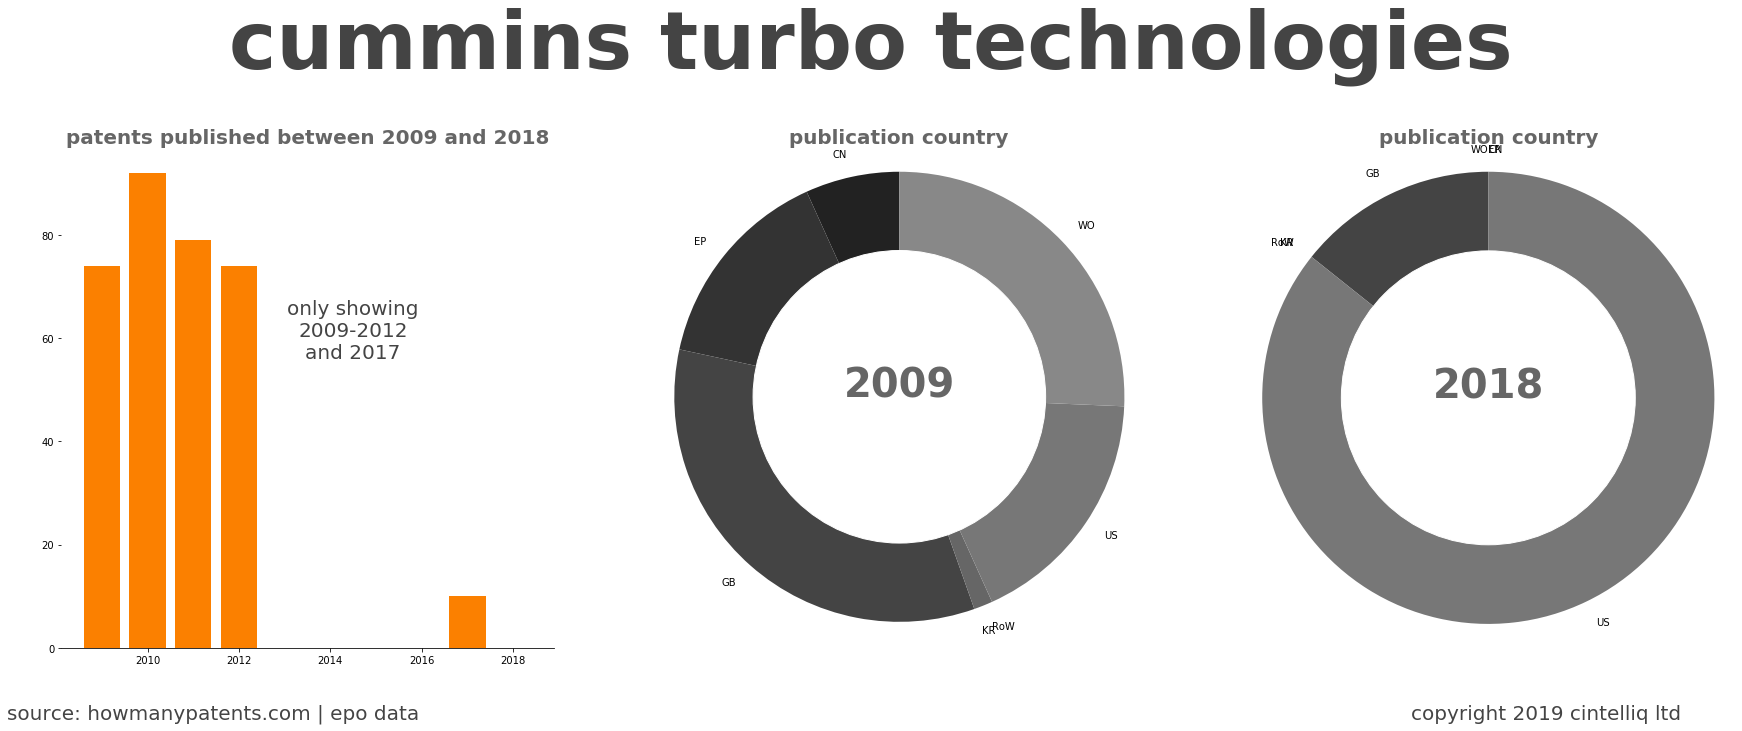 summary of patents for Cummins Turbo Technologies